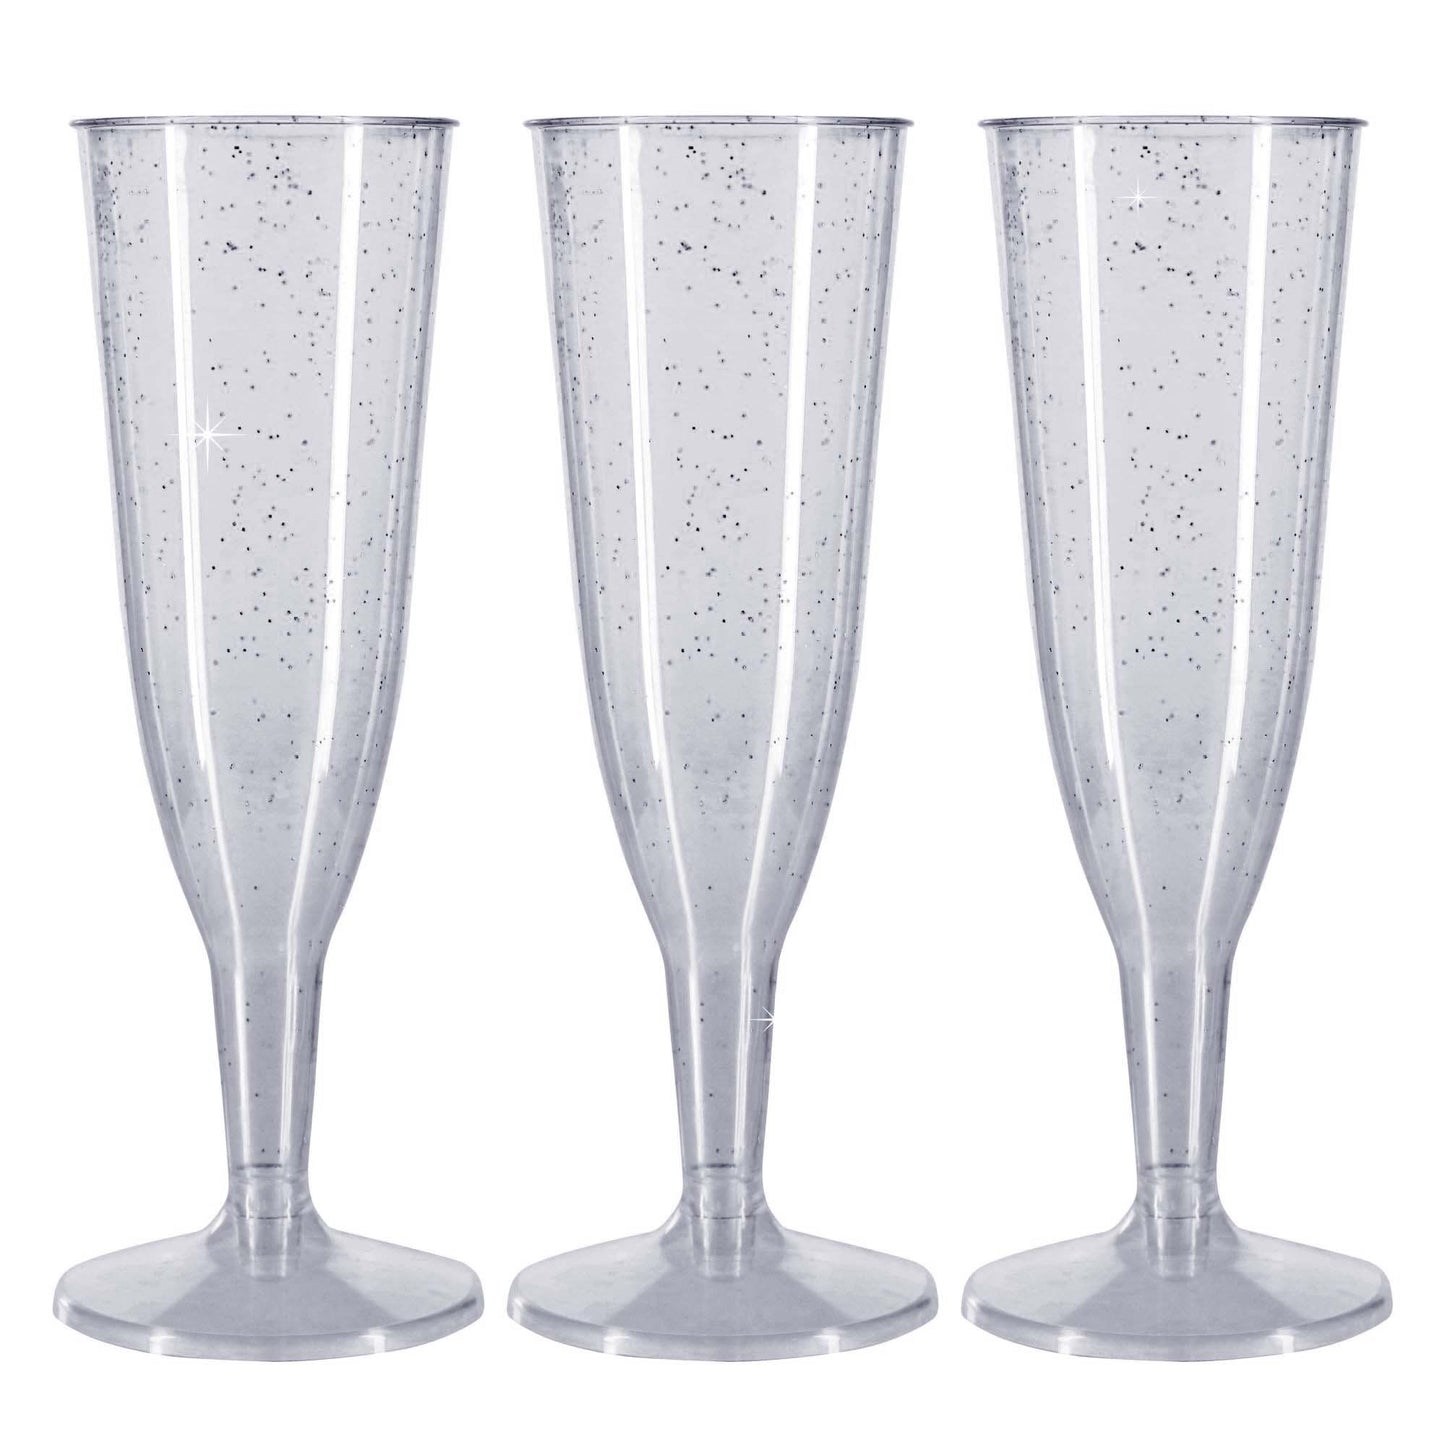 12 x Silver Glitter Prosecco Flutes - 150ml 5.2oz Capacity - Recyclable Polystyrene Material Transparent 2-Piece Sparkly Champagne